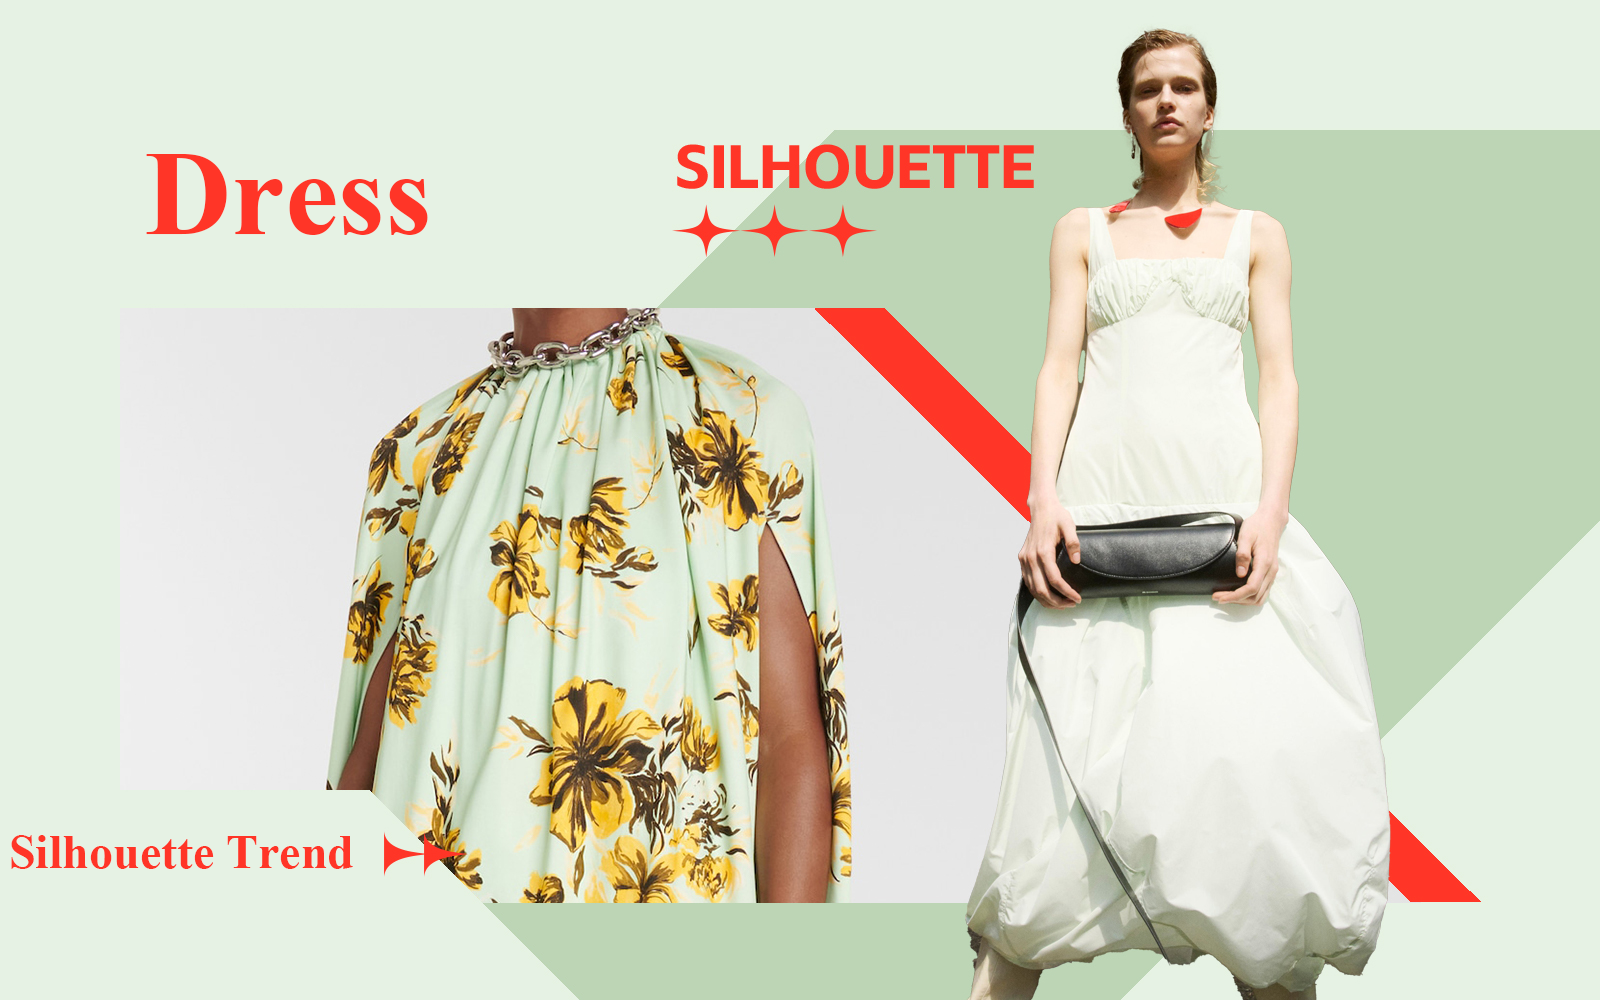 Quiet Luxury -- The Silhouette Trend for Women's Dress